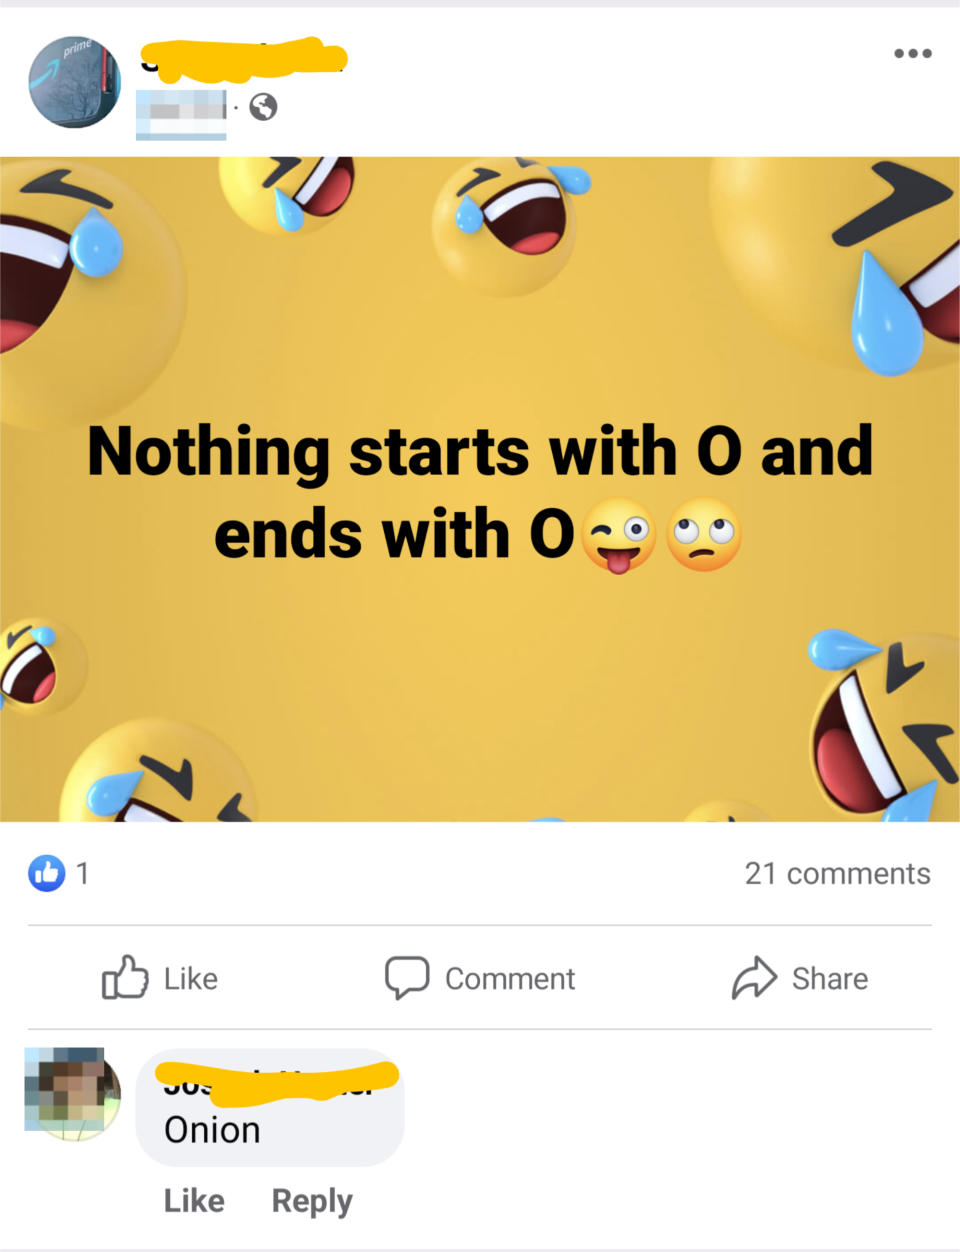 Graphic with laughing emojis and text "Nothing starts with O and ends with O." One comment visible